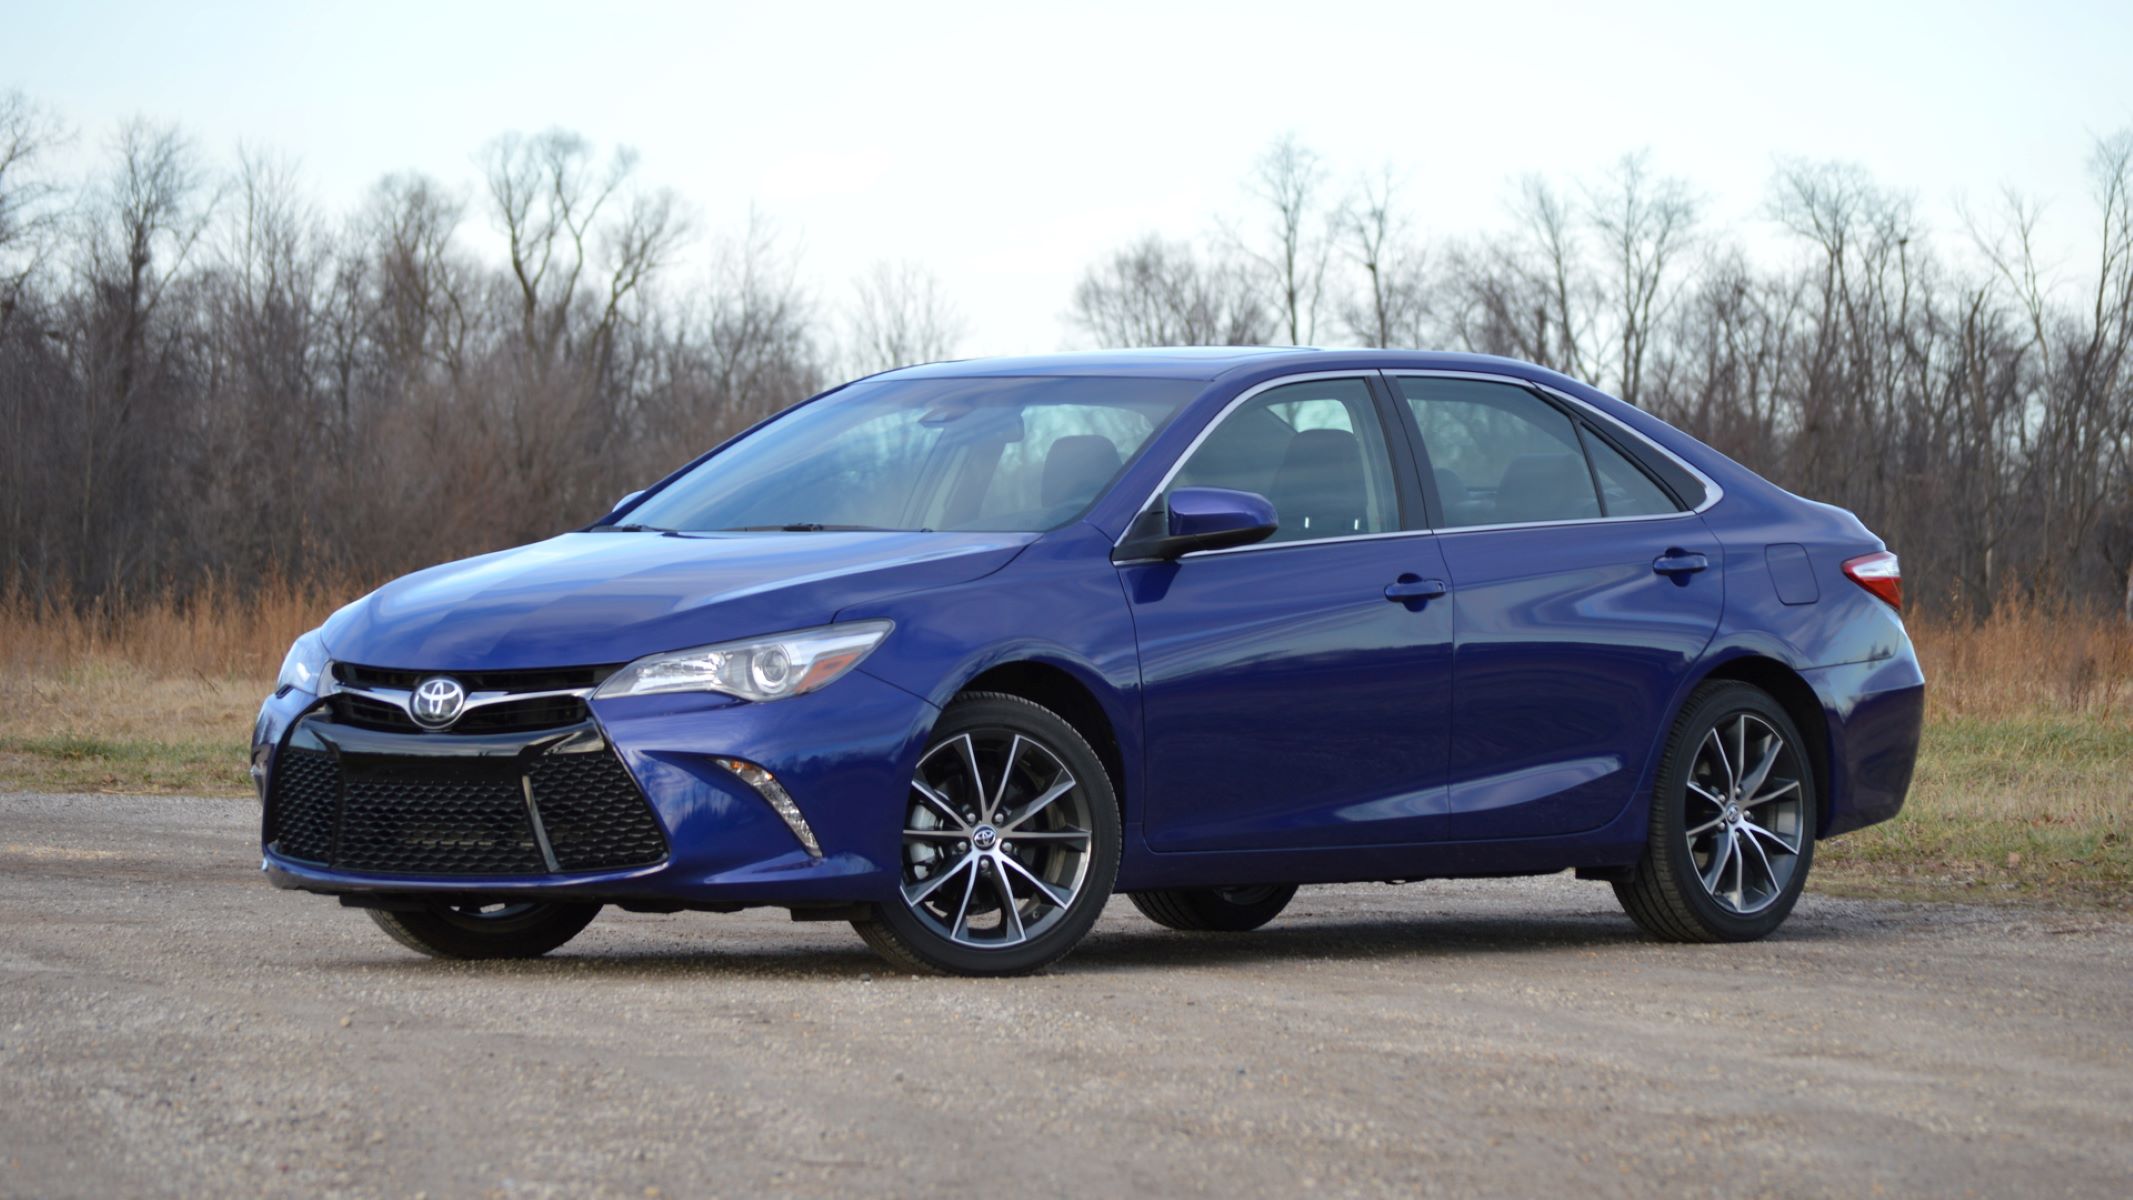 Unbelievable Deal: 2016 Toyota Camry With 120,000 Miles – Is It Worth It?